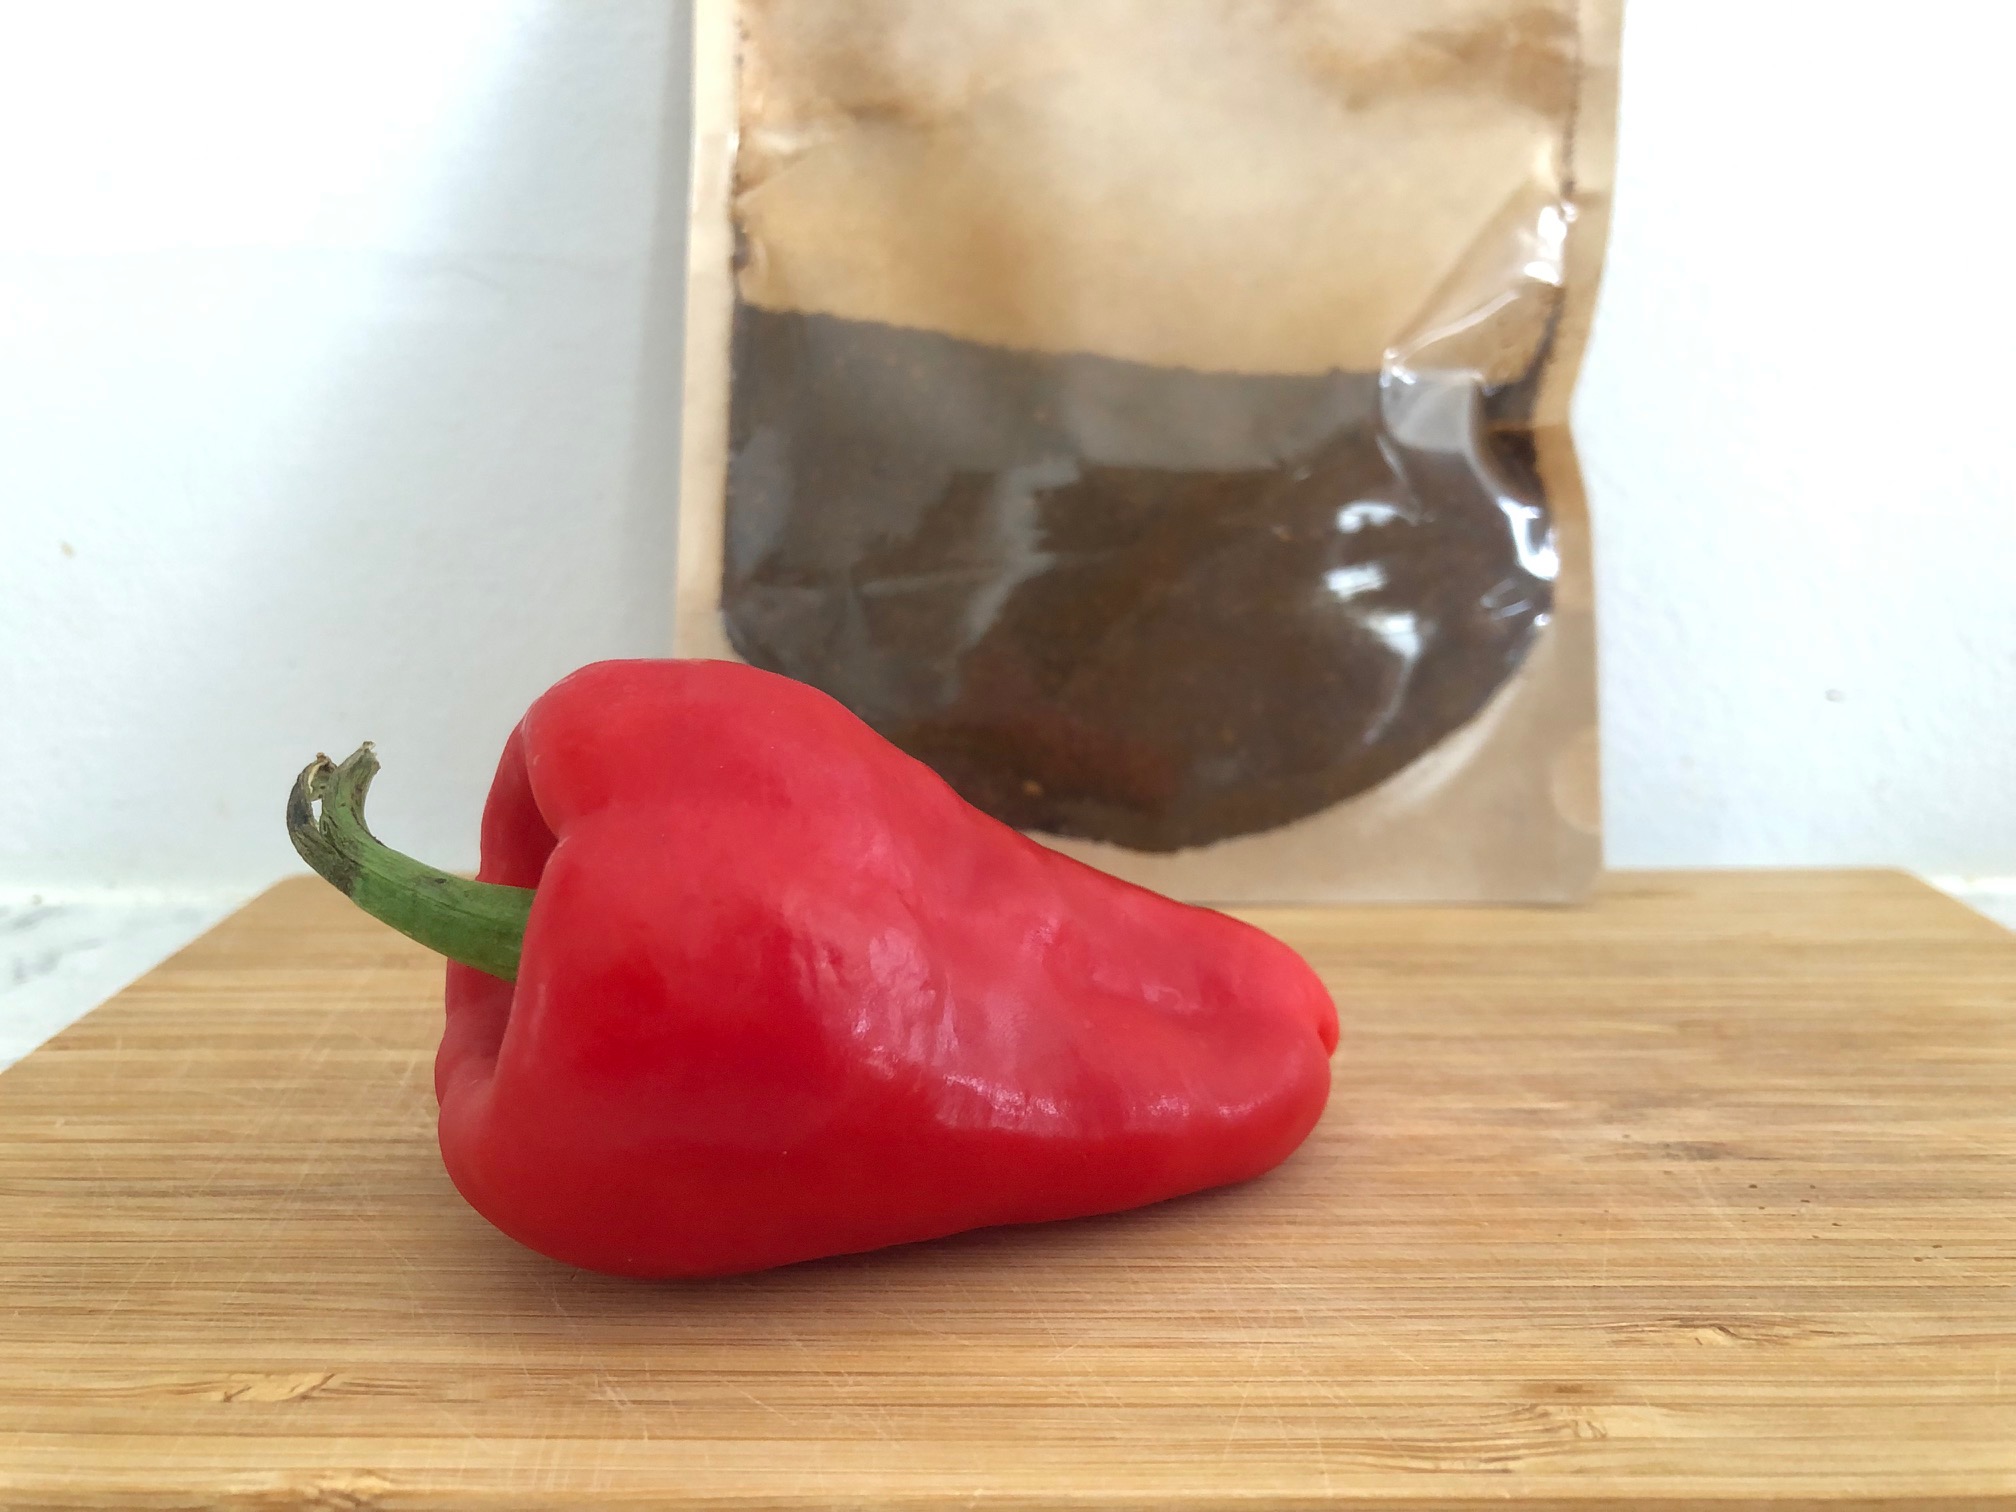 On a wooden cutting board, a red paprika pepper lays uncut on its side. Behind it is a plastic bag of dried paprika spice. Photo by Alyssa Buckley.